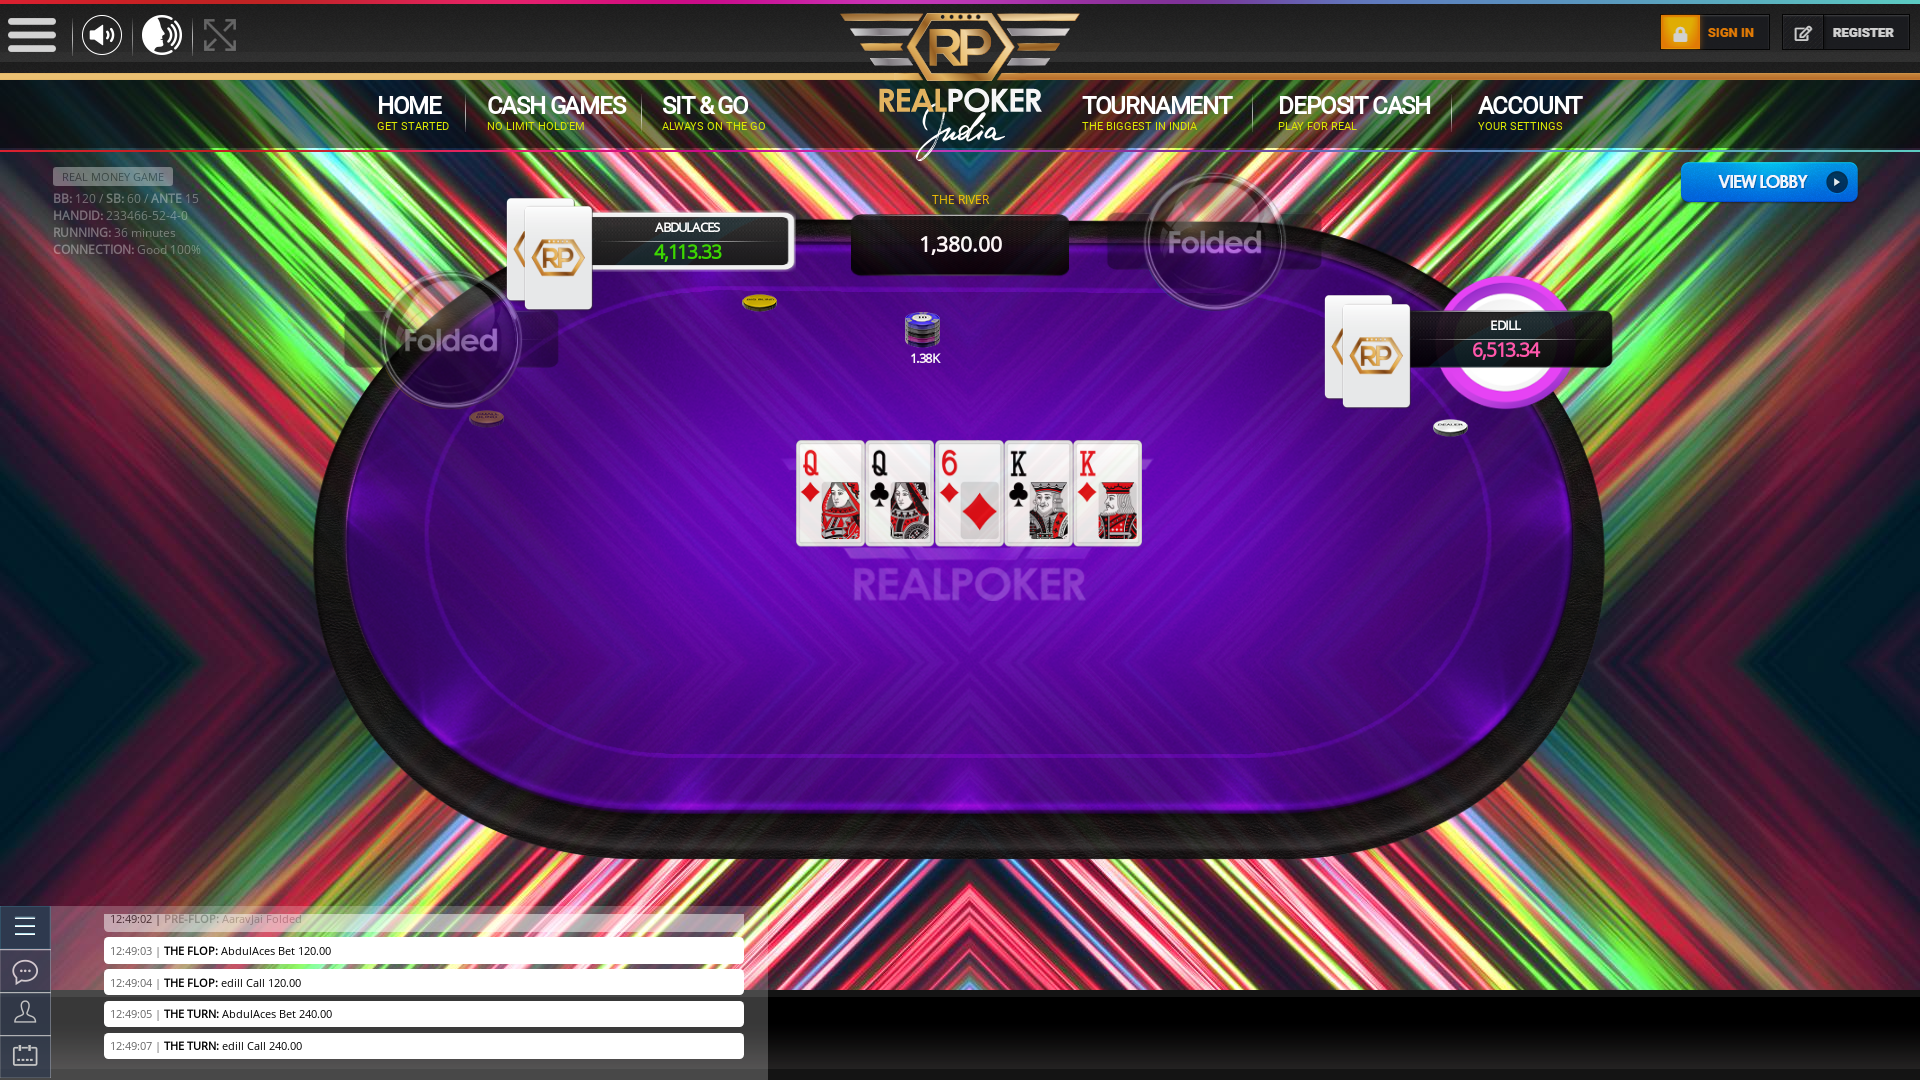 Indian online poker on a 10 player table in the 36th minute match up